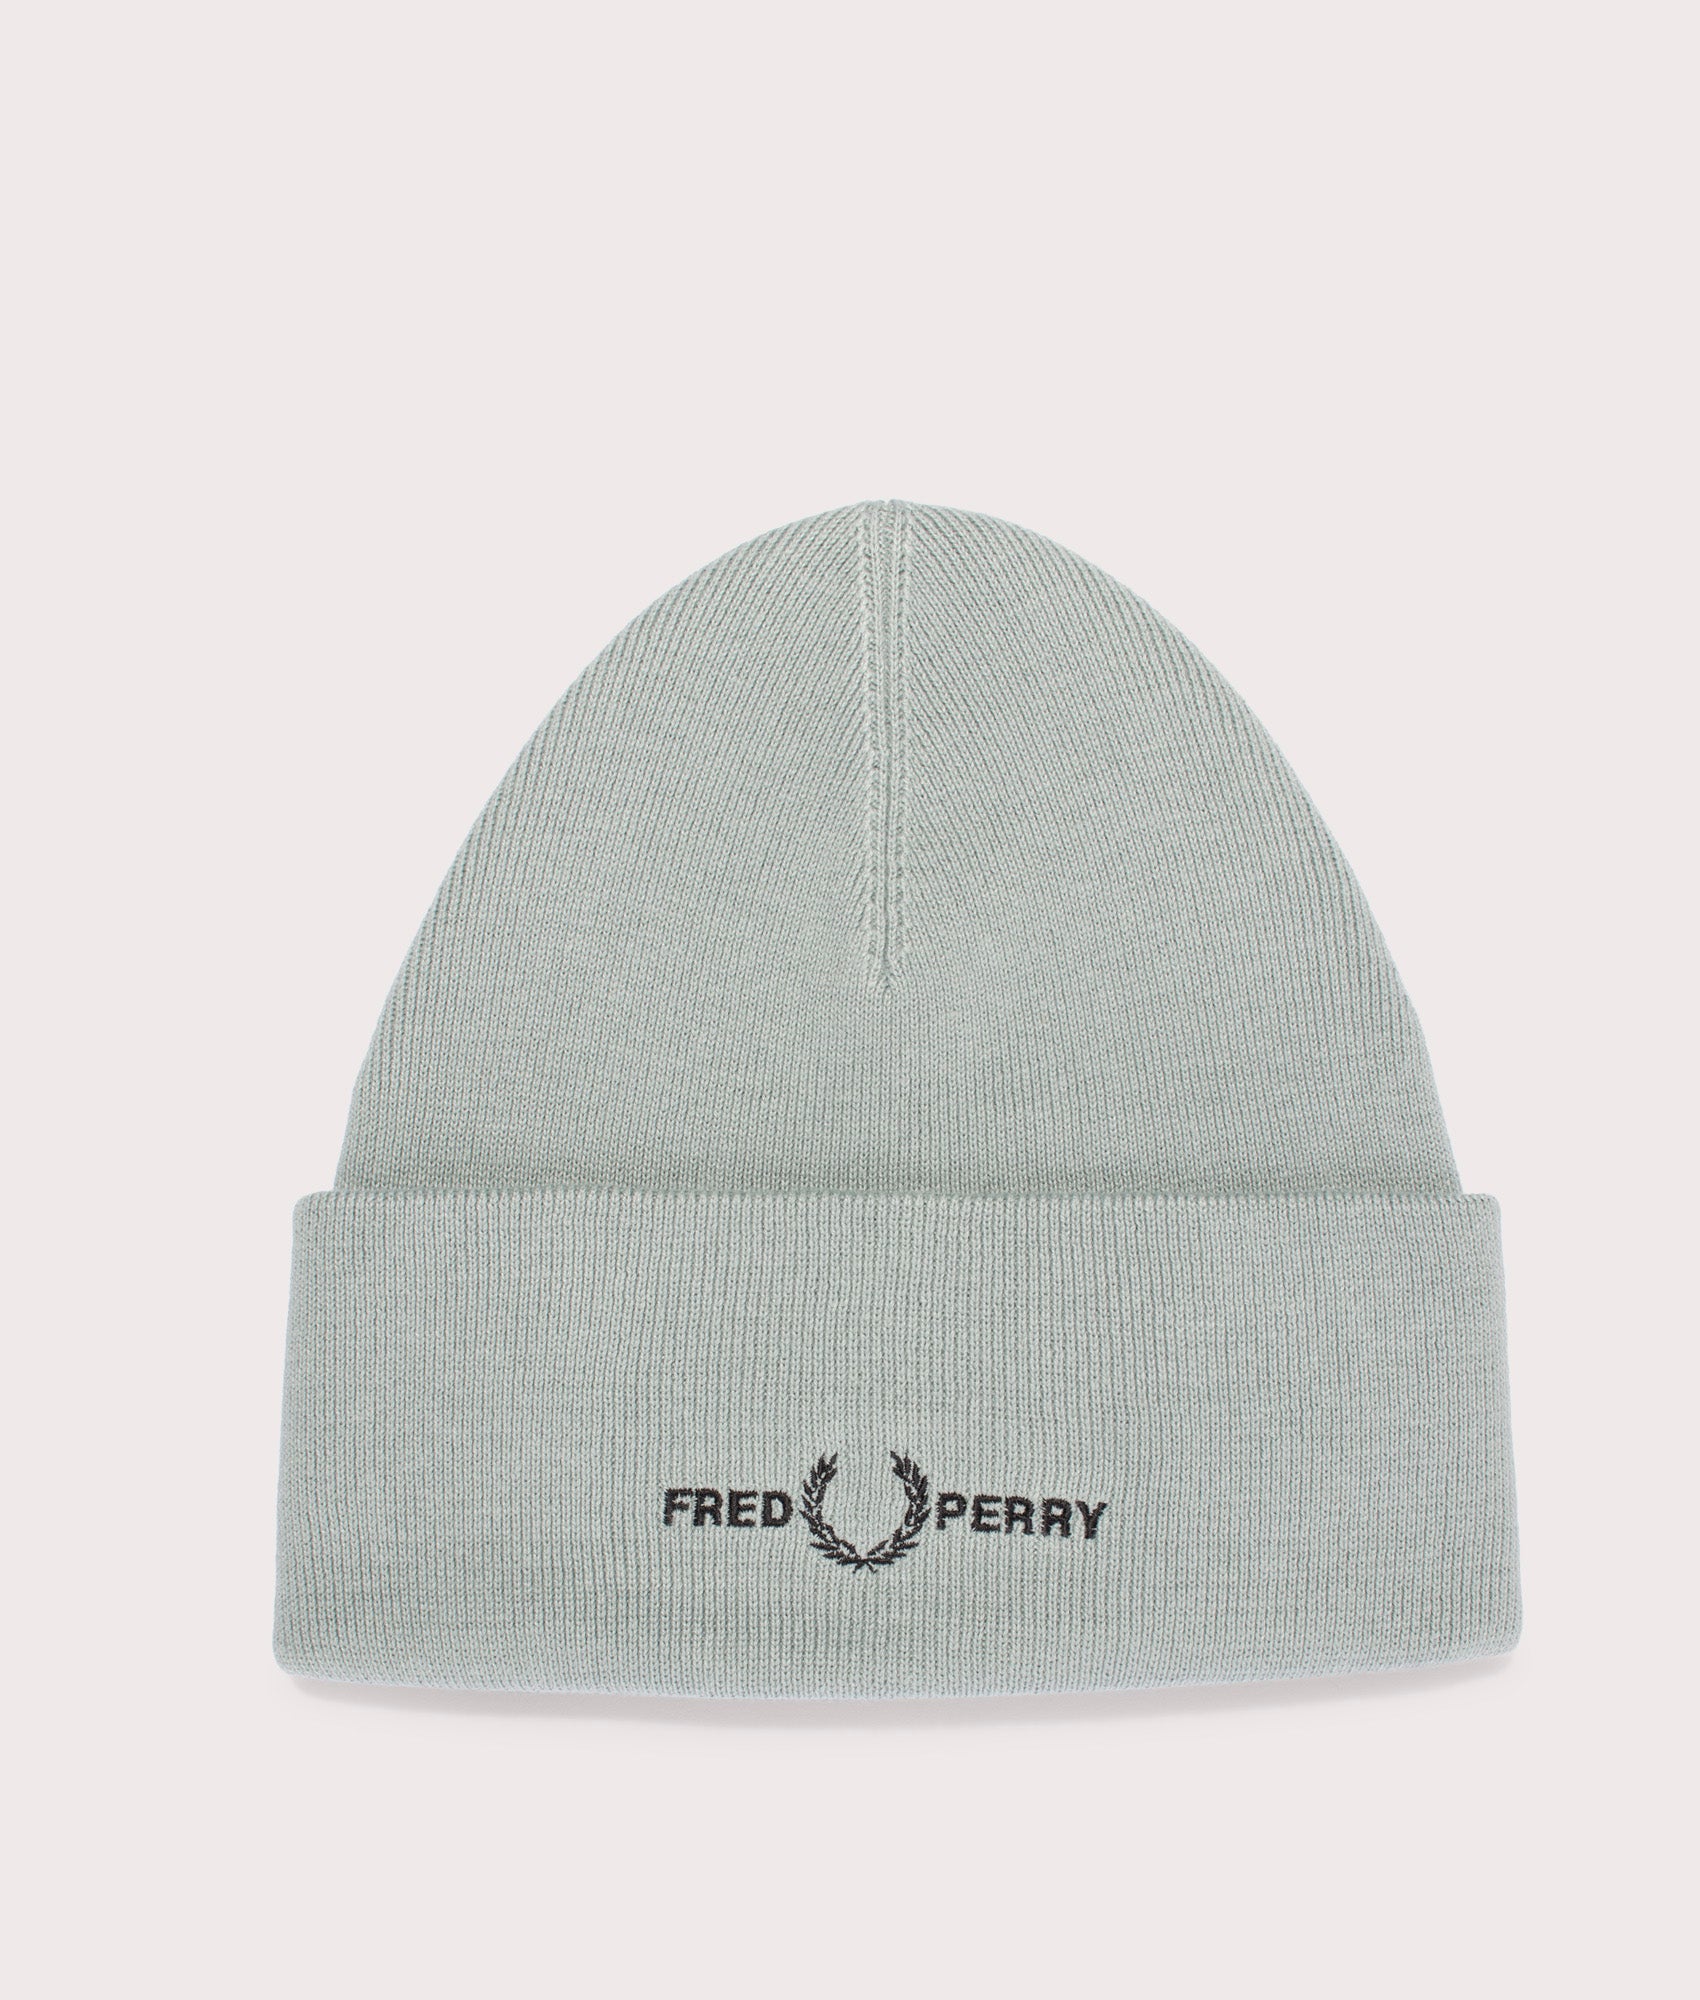 Fred Perry Mens Graphic Beanie - Colour: 959 Silver Blue - Size: One Size